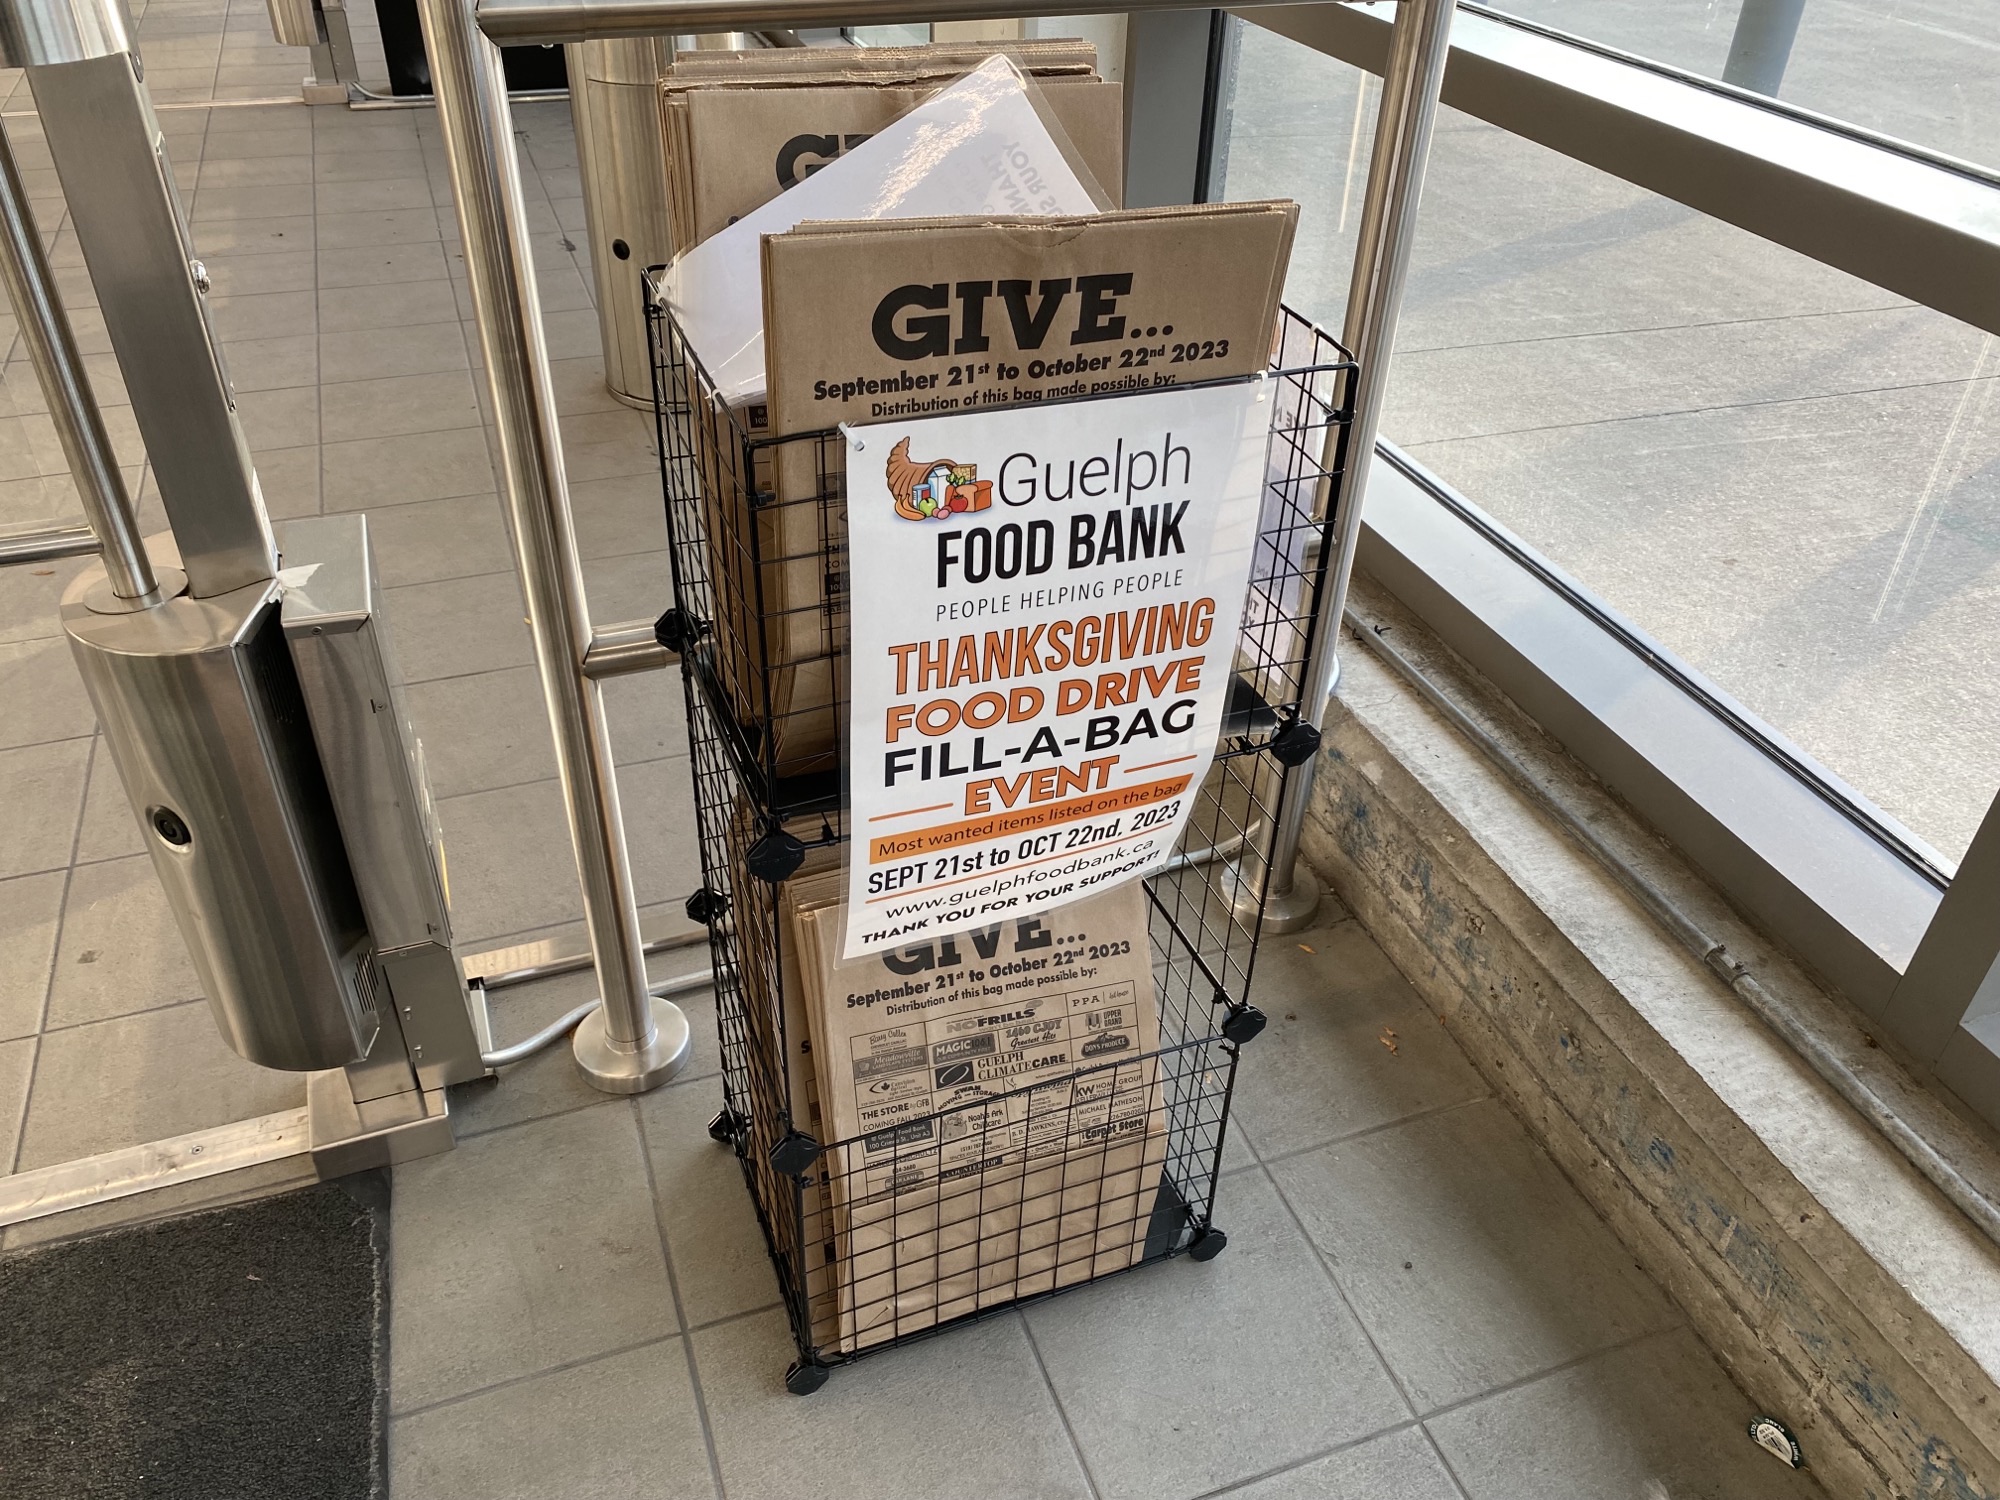 Thanksgiving food drive in Guelph picking up after slow start